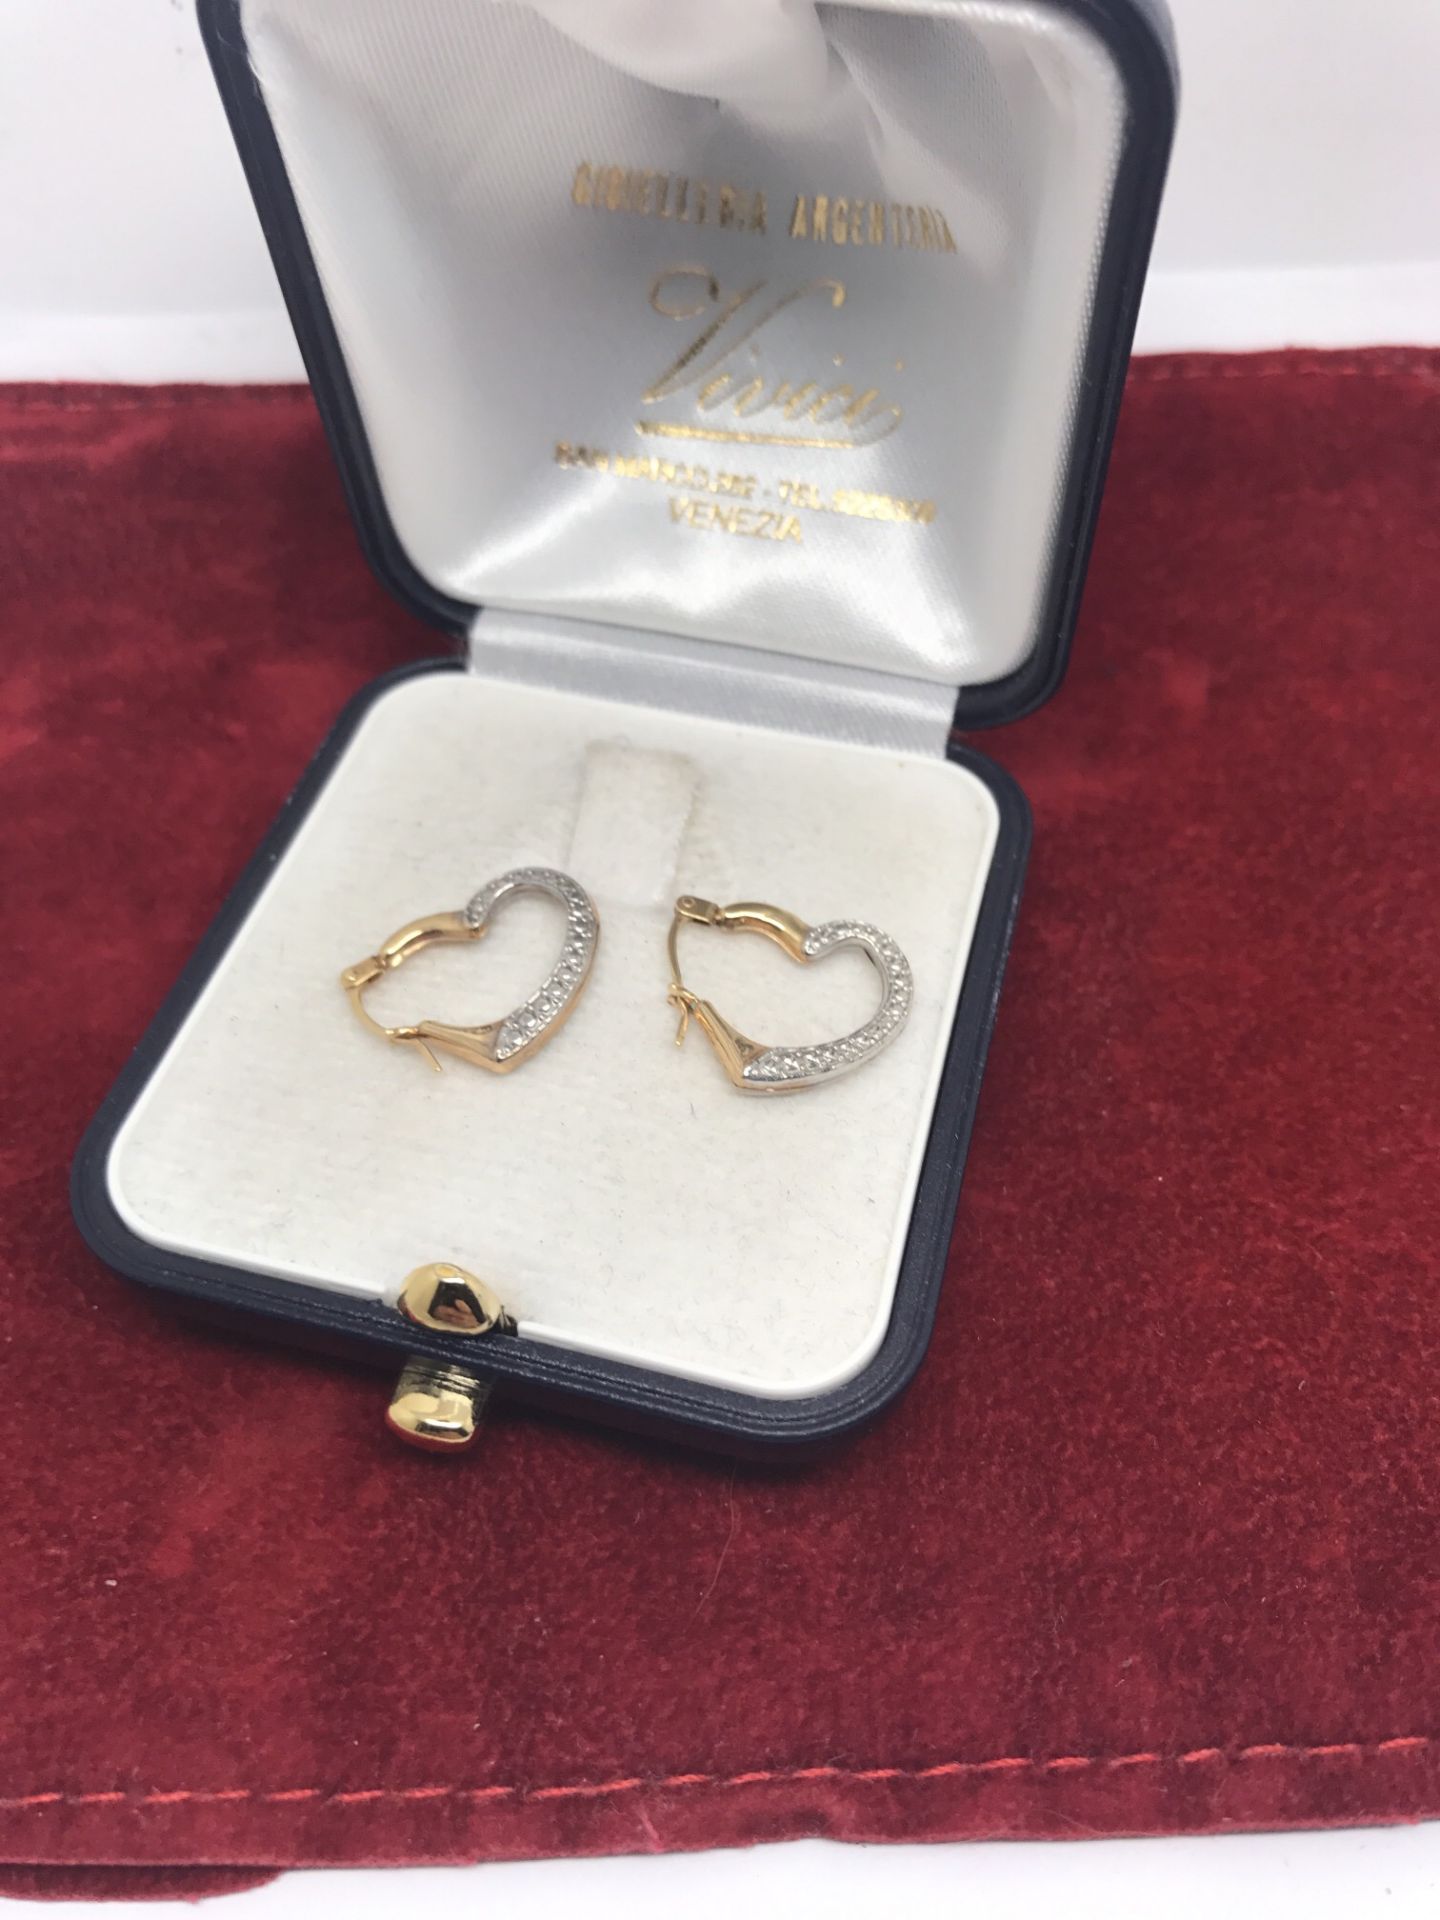 9ct GOLD HEART SHAPED EARRINGS - Image 2 of 2